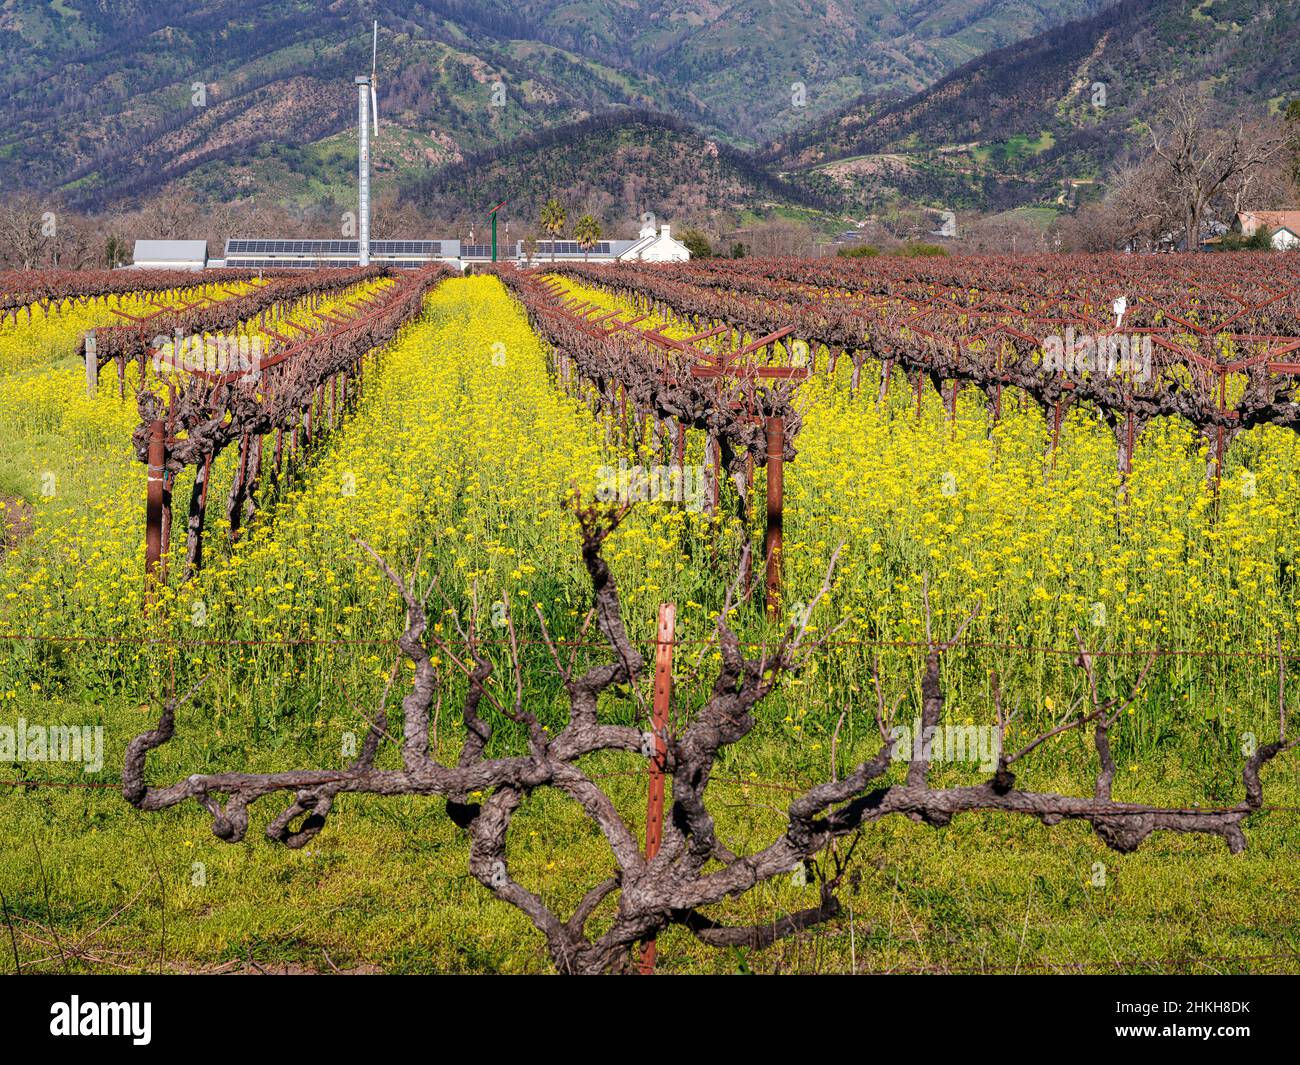 A field of mustard flowers on vineyard in Napa Valley, California. Stock Photo